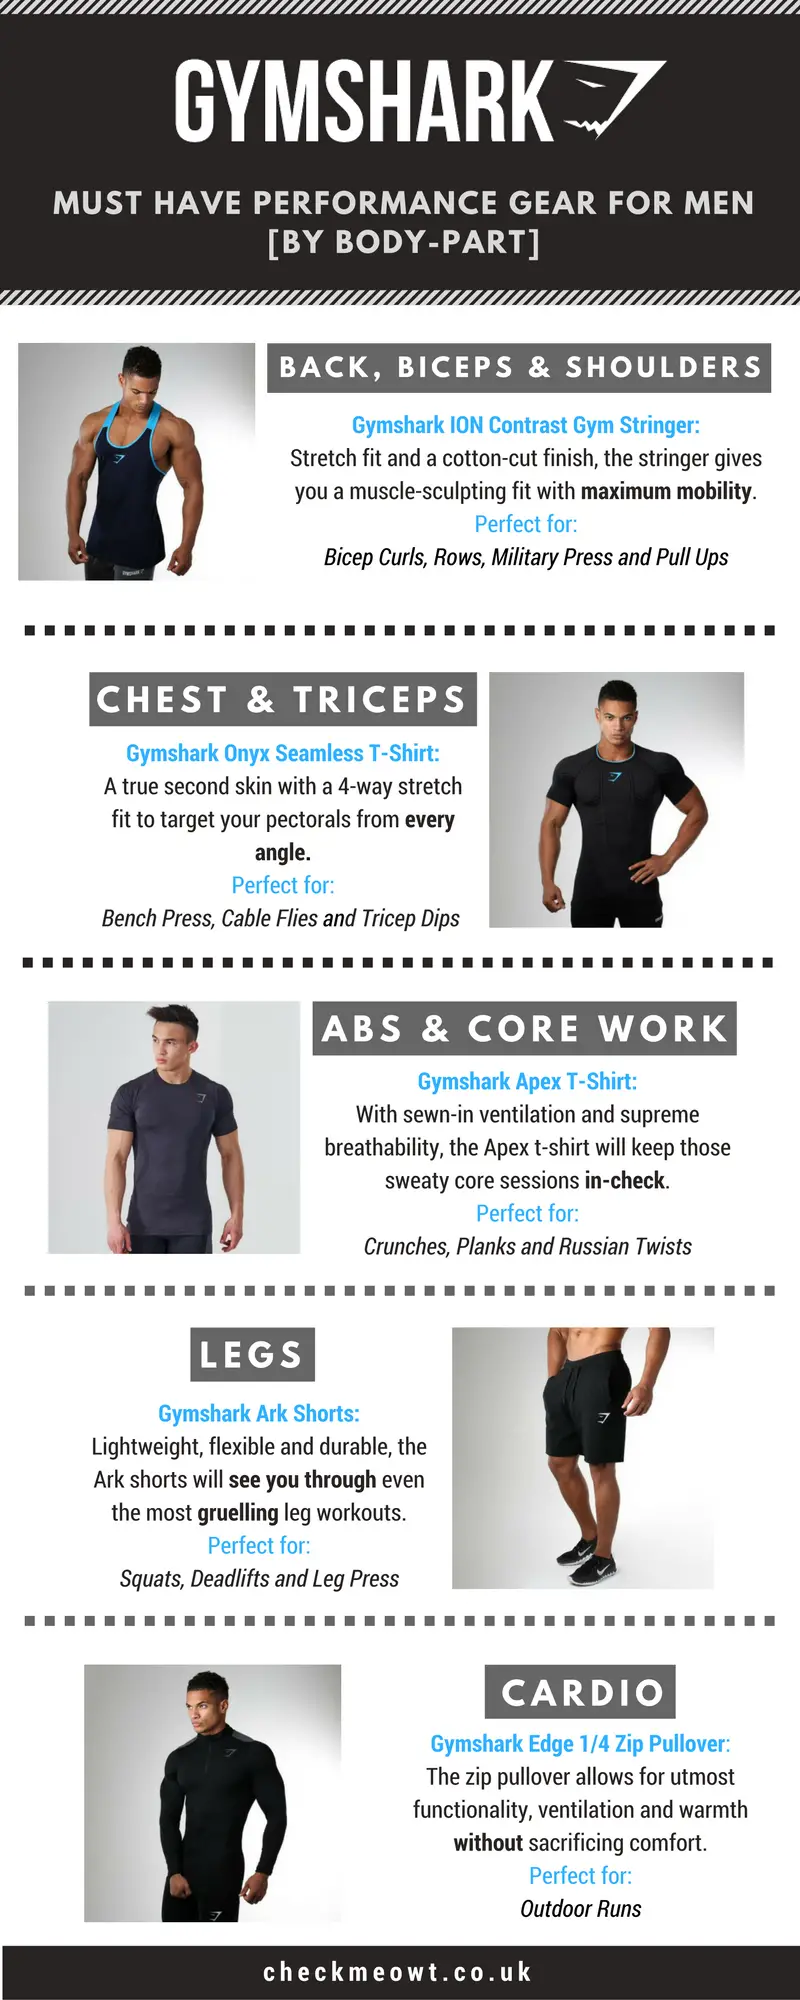 Gymshark Infographic [Must Have Performance Gear For Men]